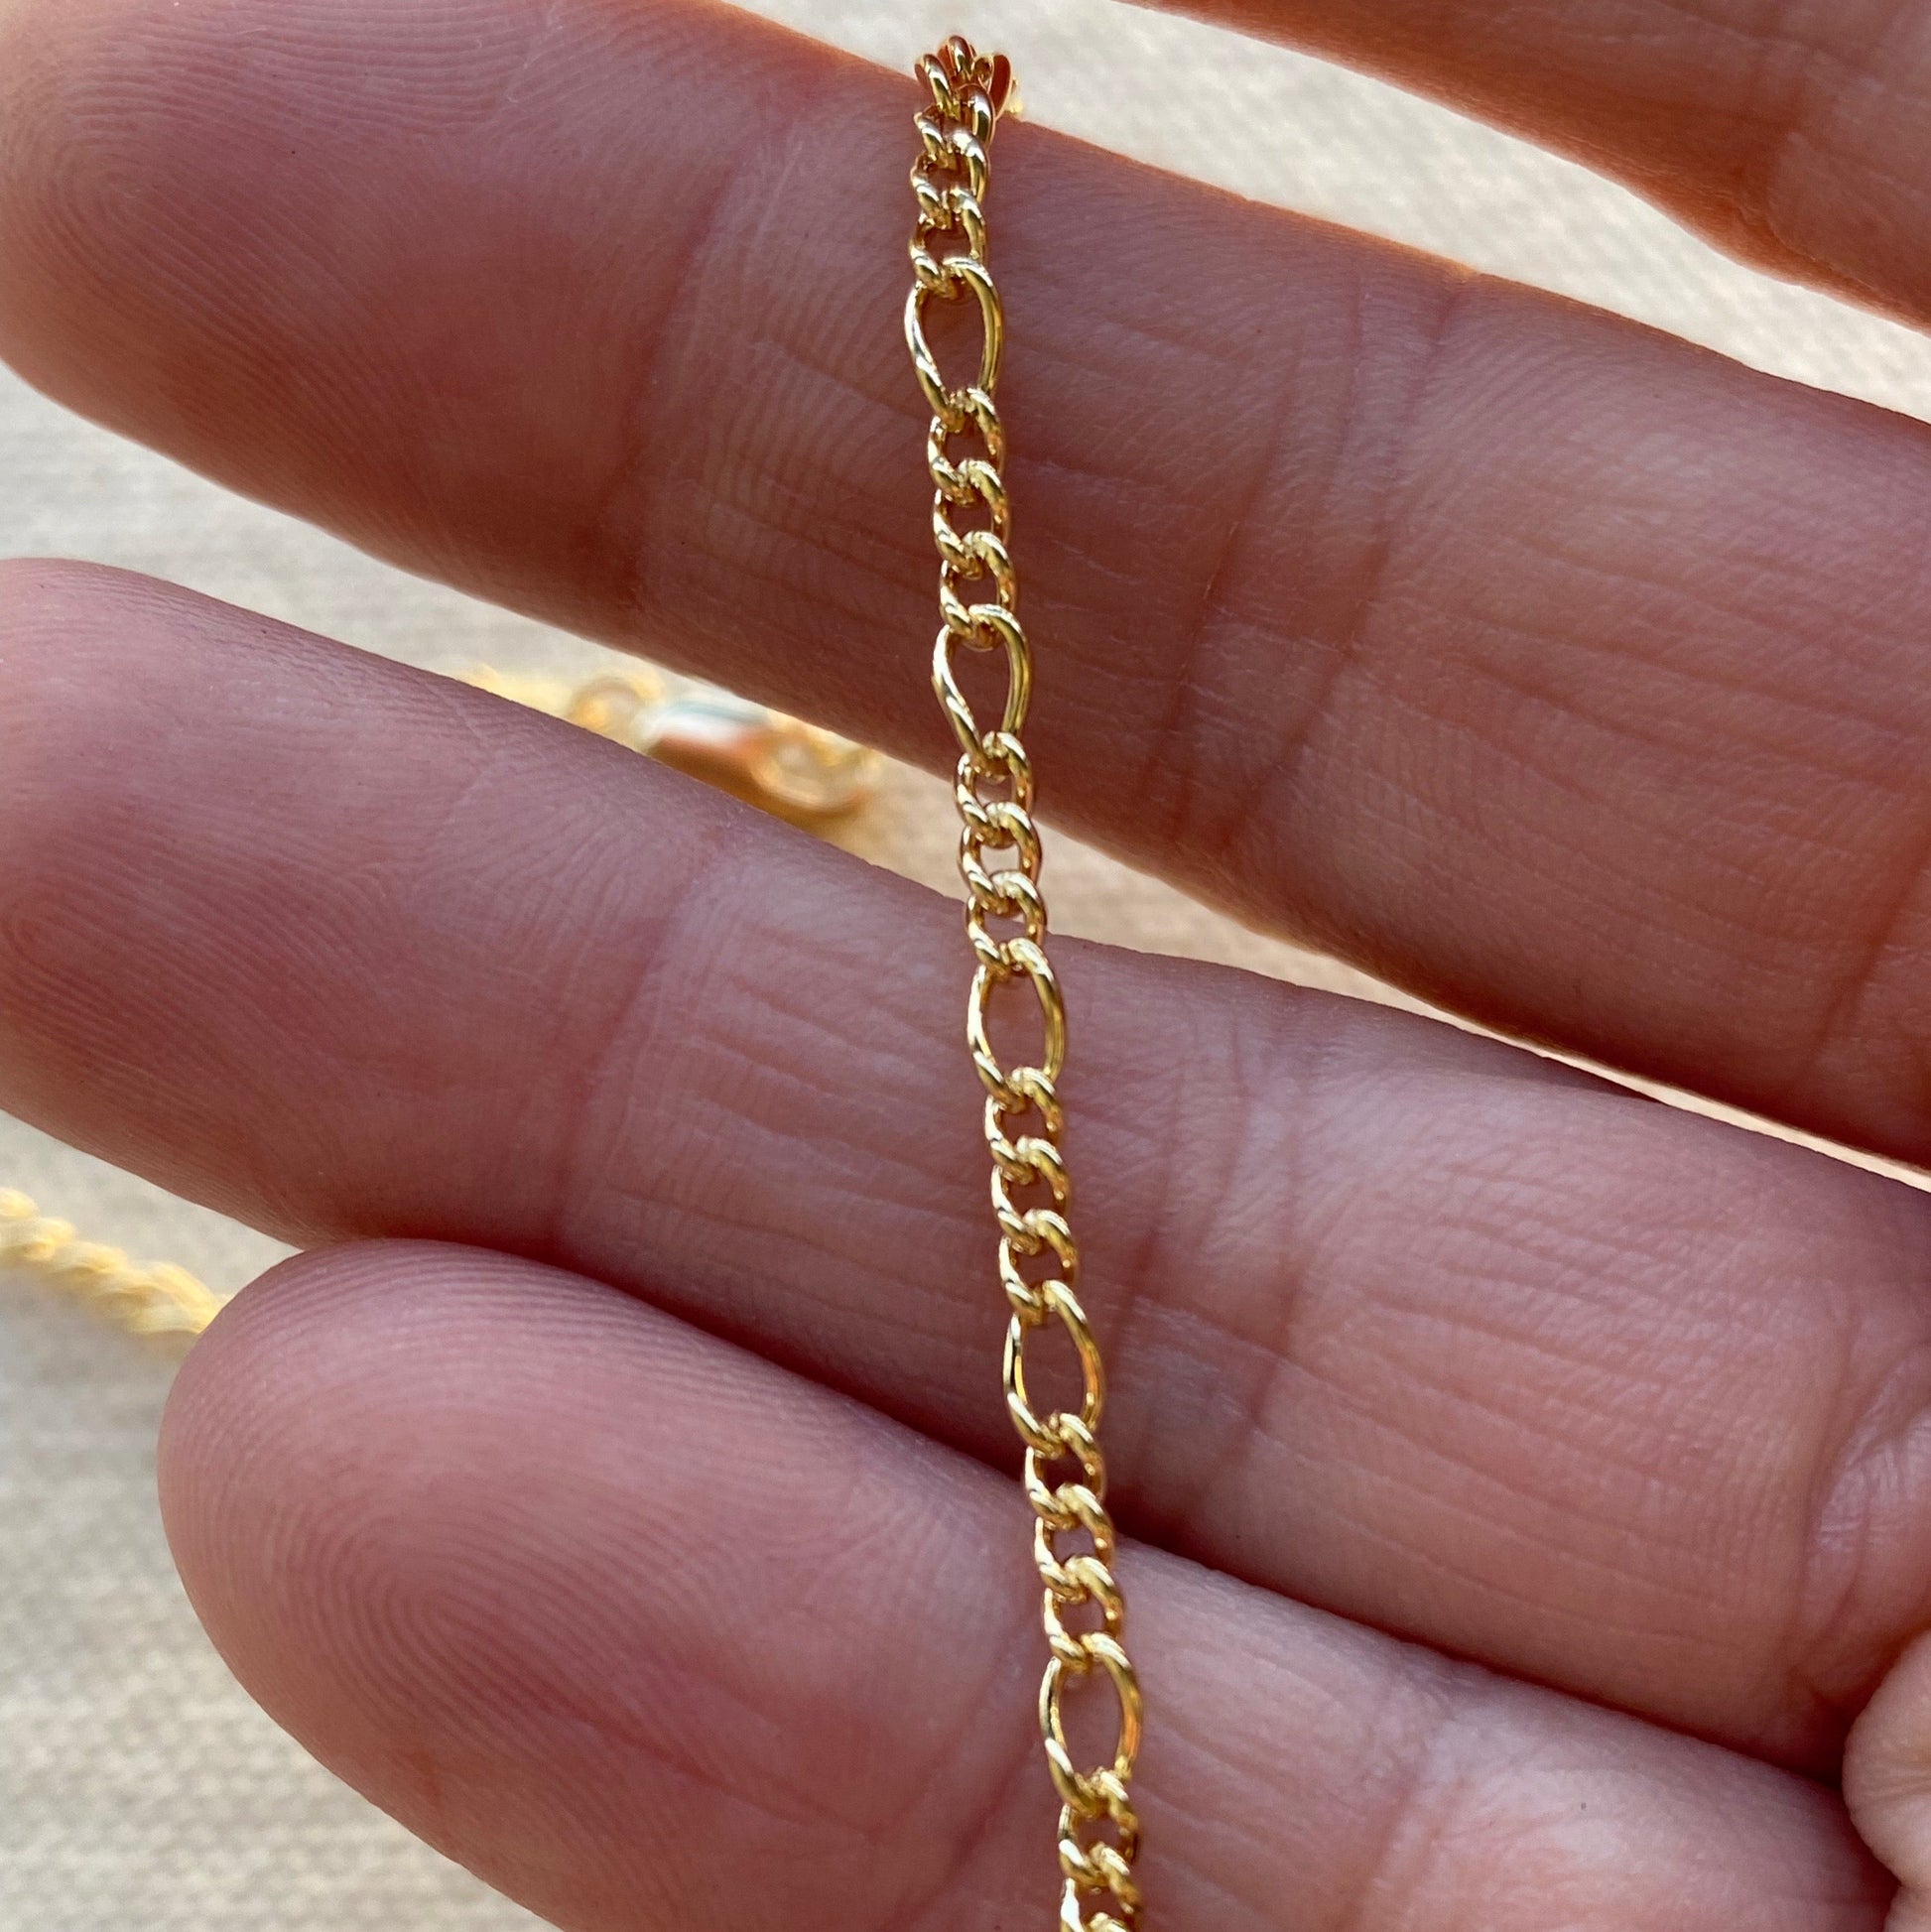 GoldFi 18k Gold Filled 2mm Rounded 3x1 Figaro Chain